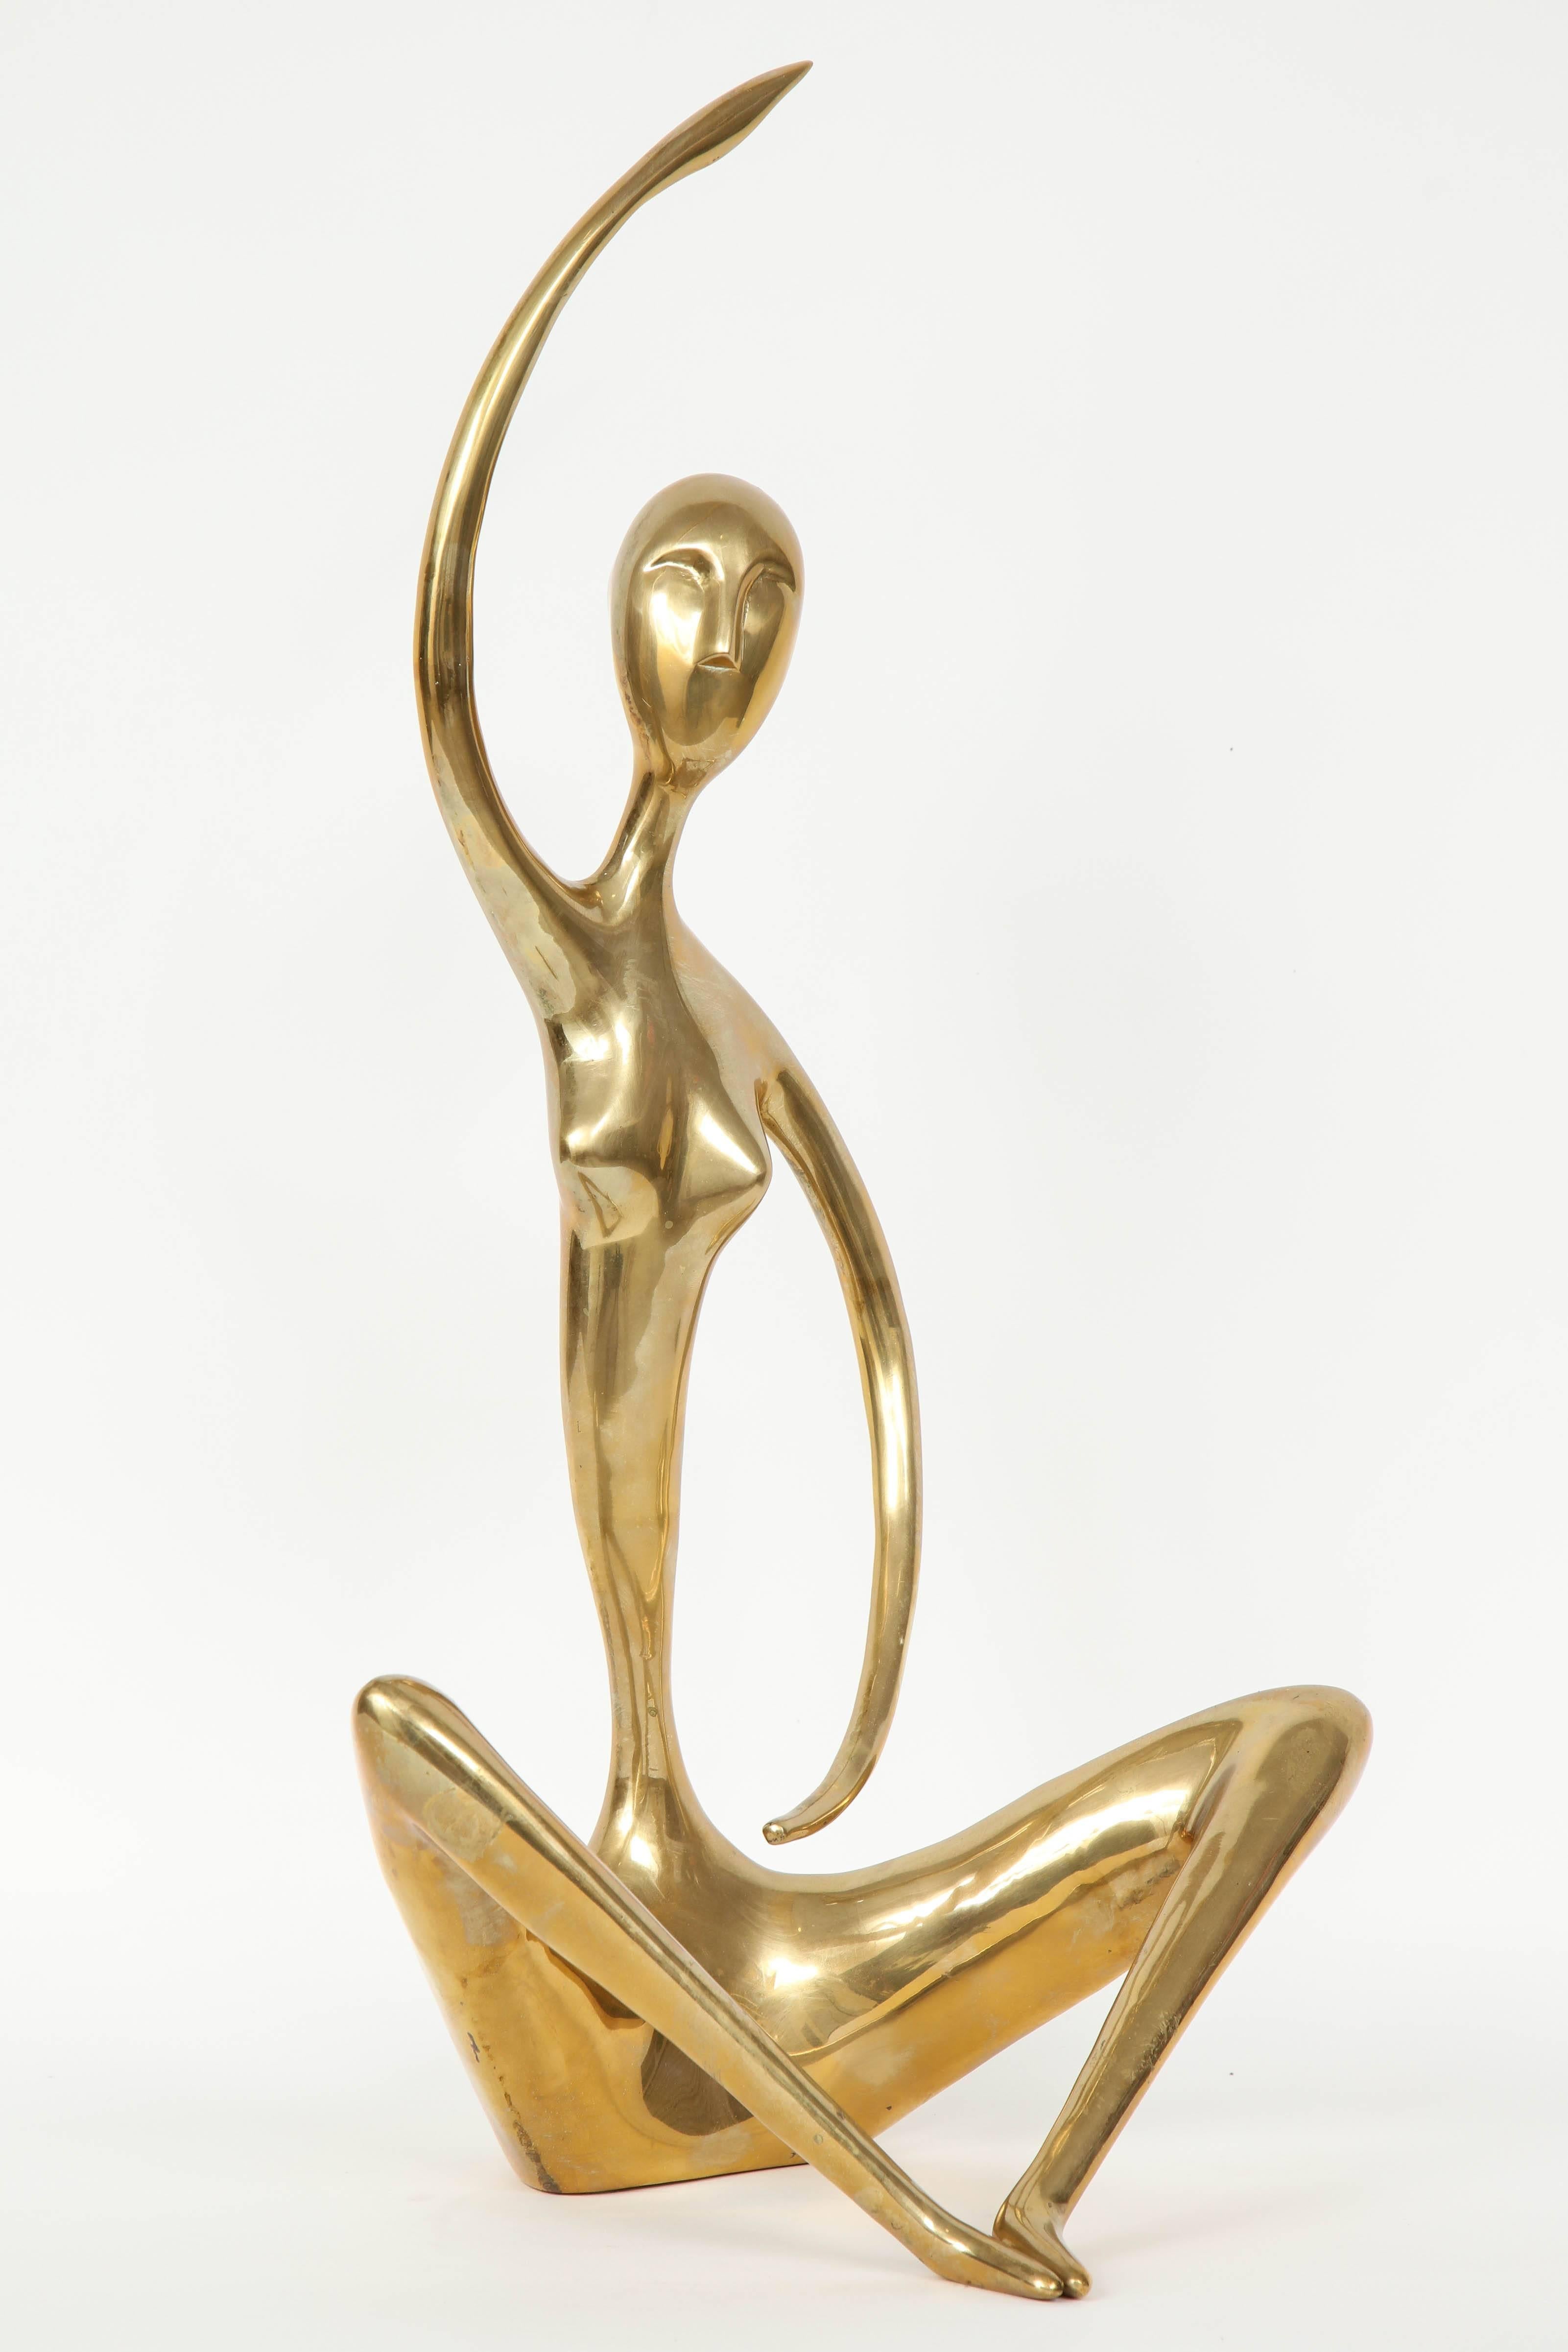 Modernist brass sculpture of seated figure holding a yoga pose. Brass has a great aged patina. Jaru.